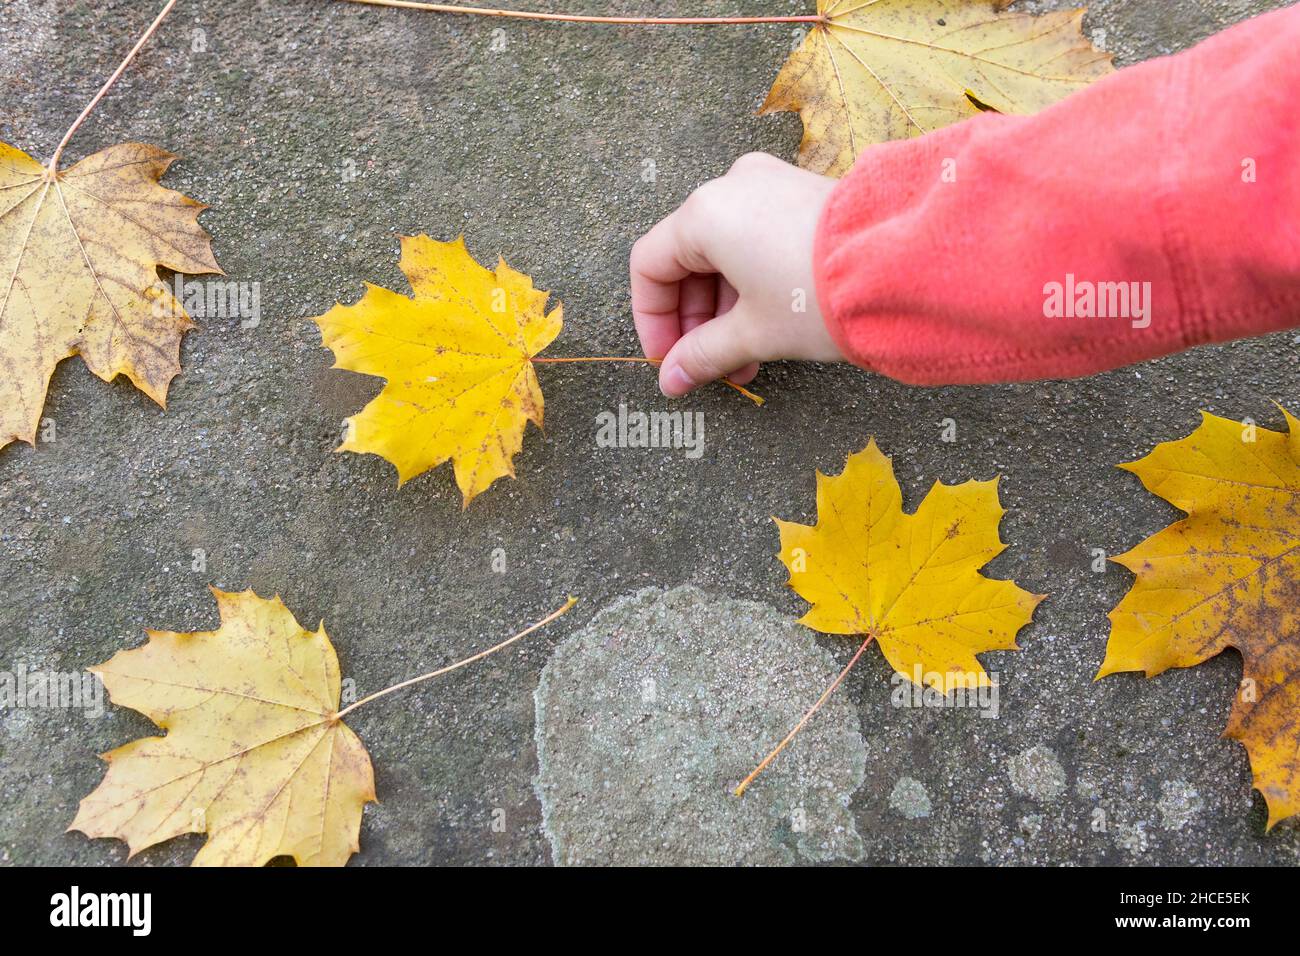 Top view of crop unrecognizable person putting withered yellow maple leaf on stone surface with fallen foliage in nature on autumn day Stock Photo